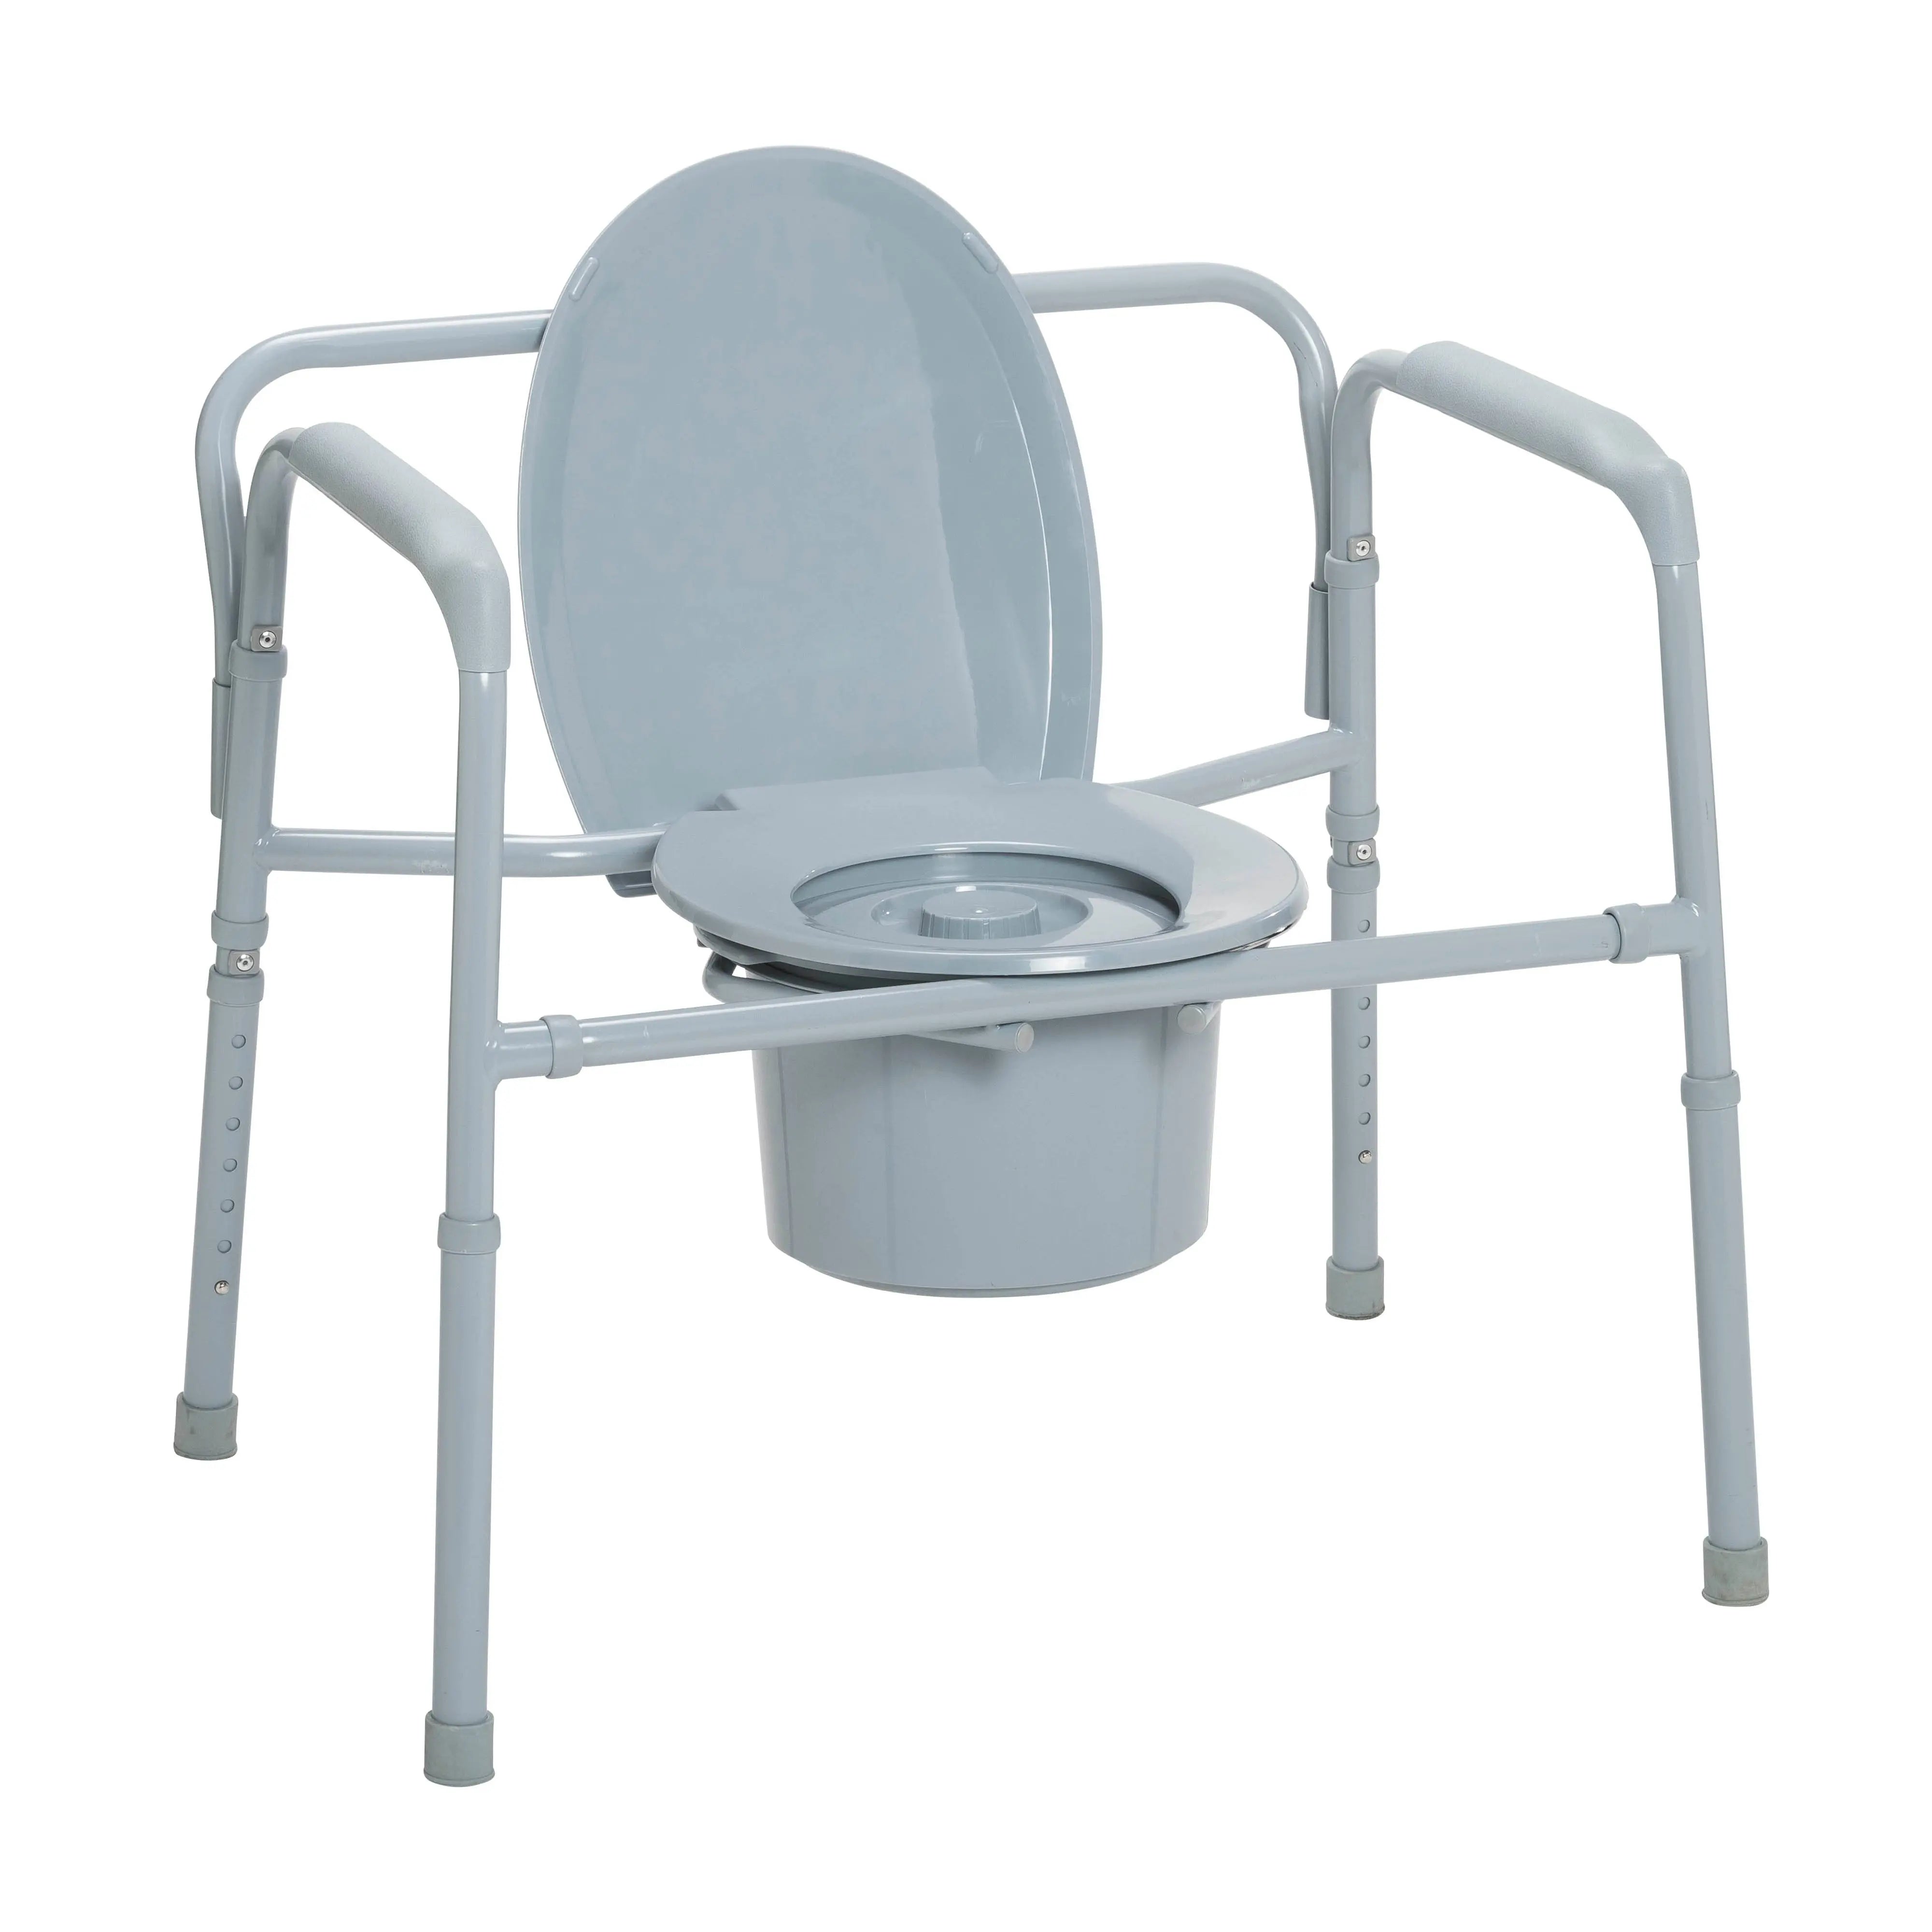 Heavy Duty Bariatric Folding Bedside Commode Seat